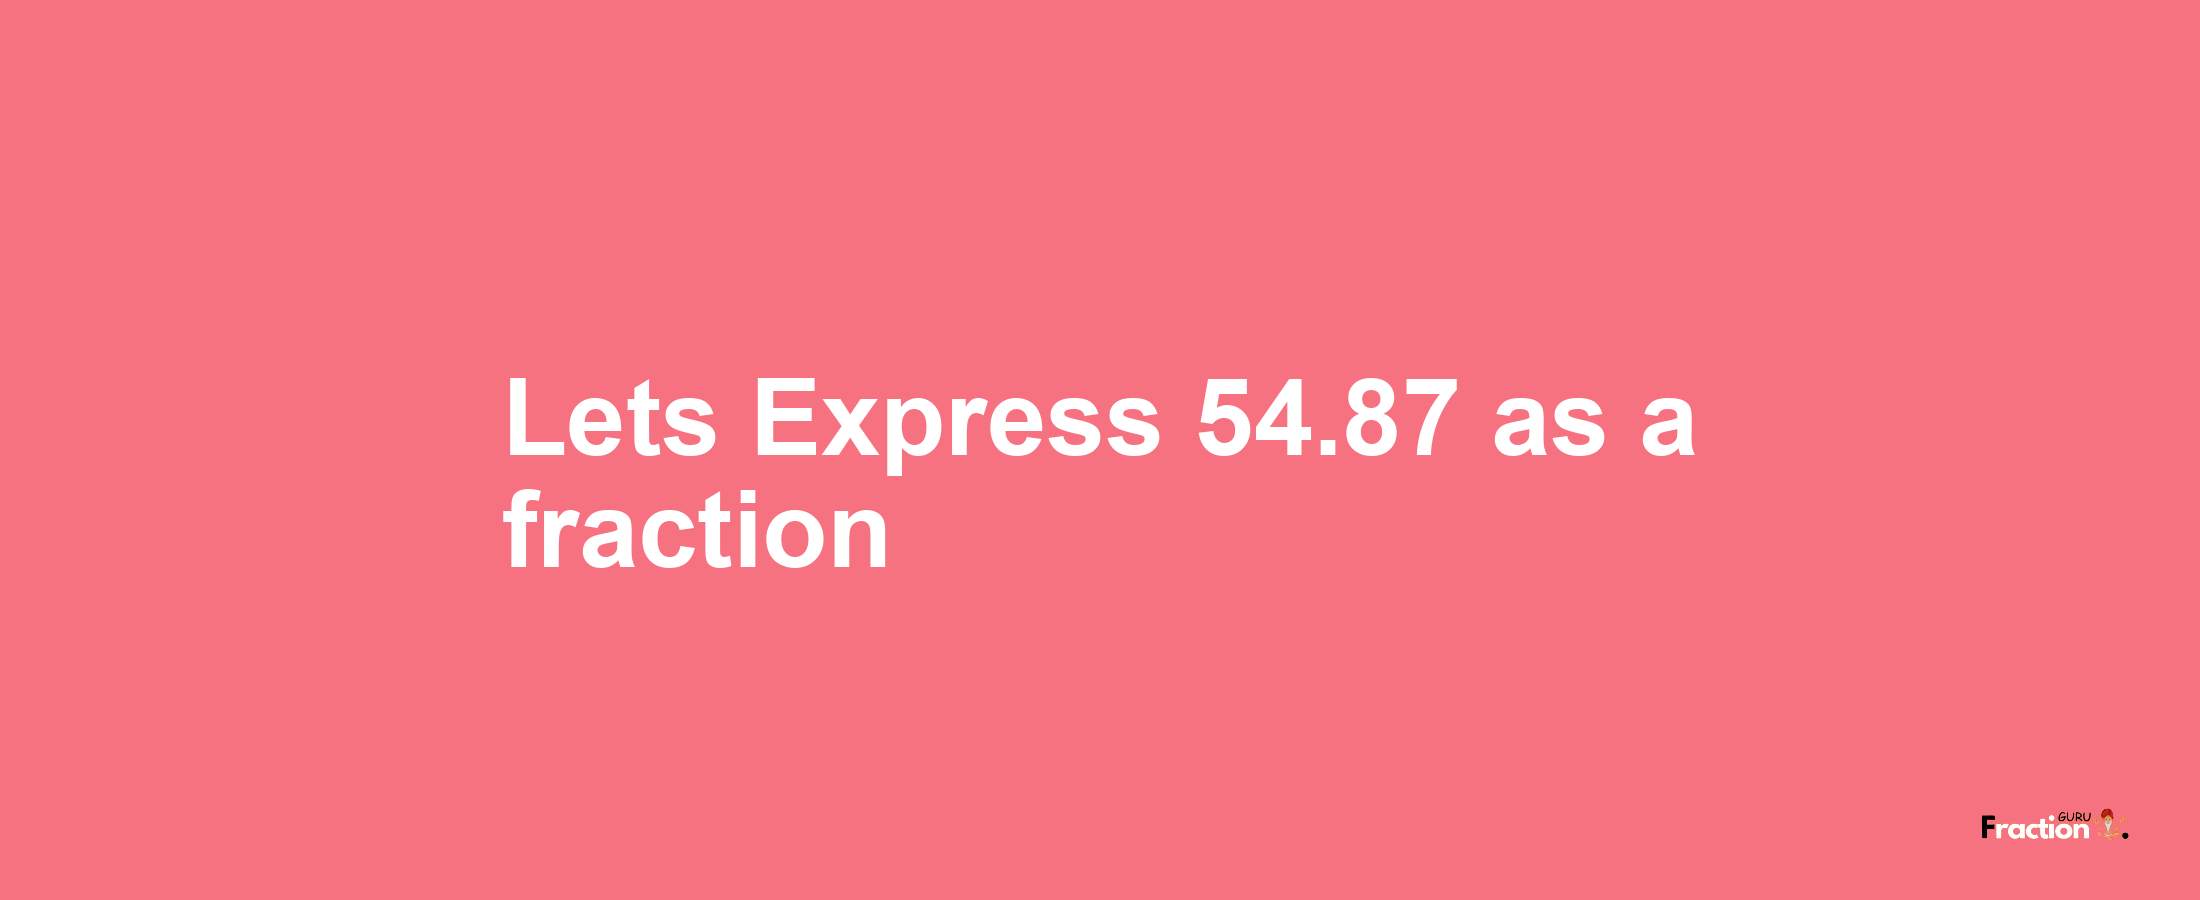 Lets Express 54.87 as afraction